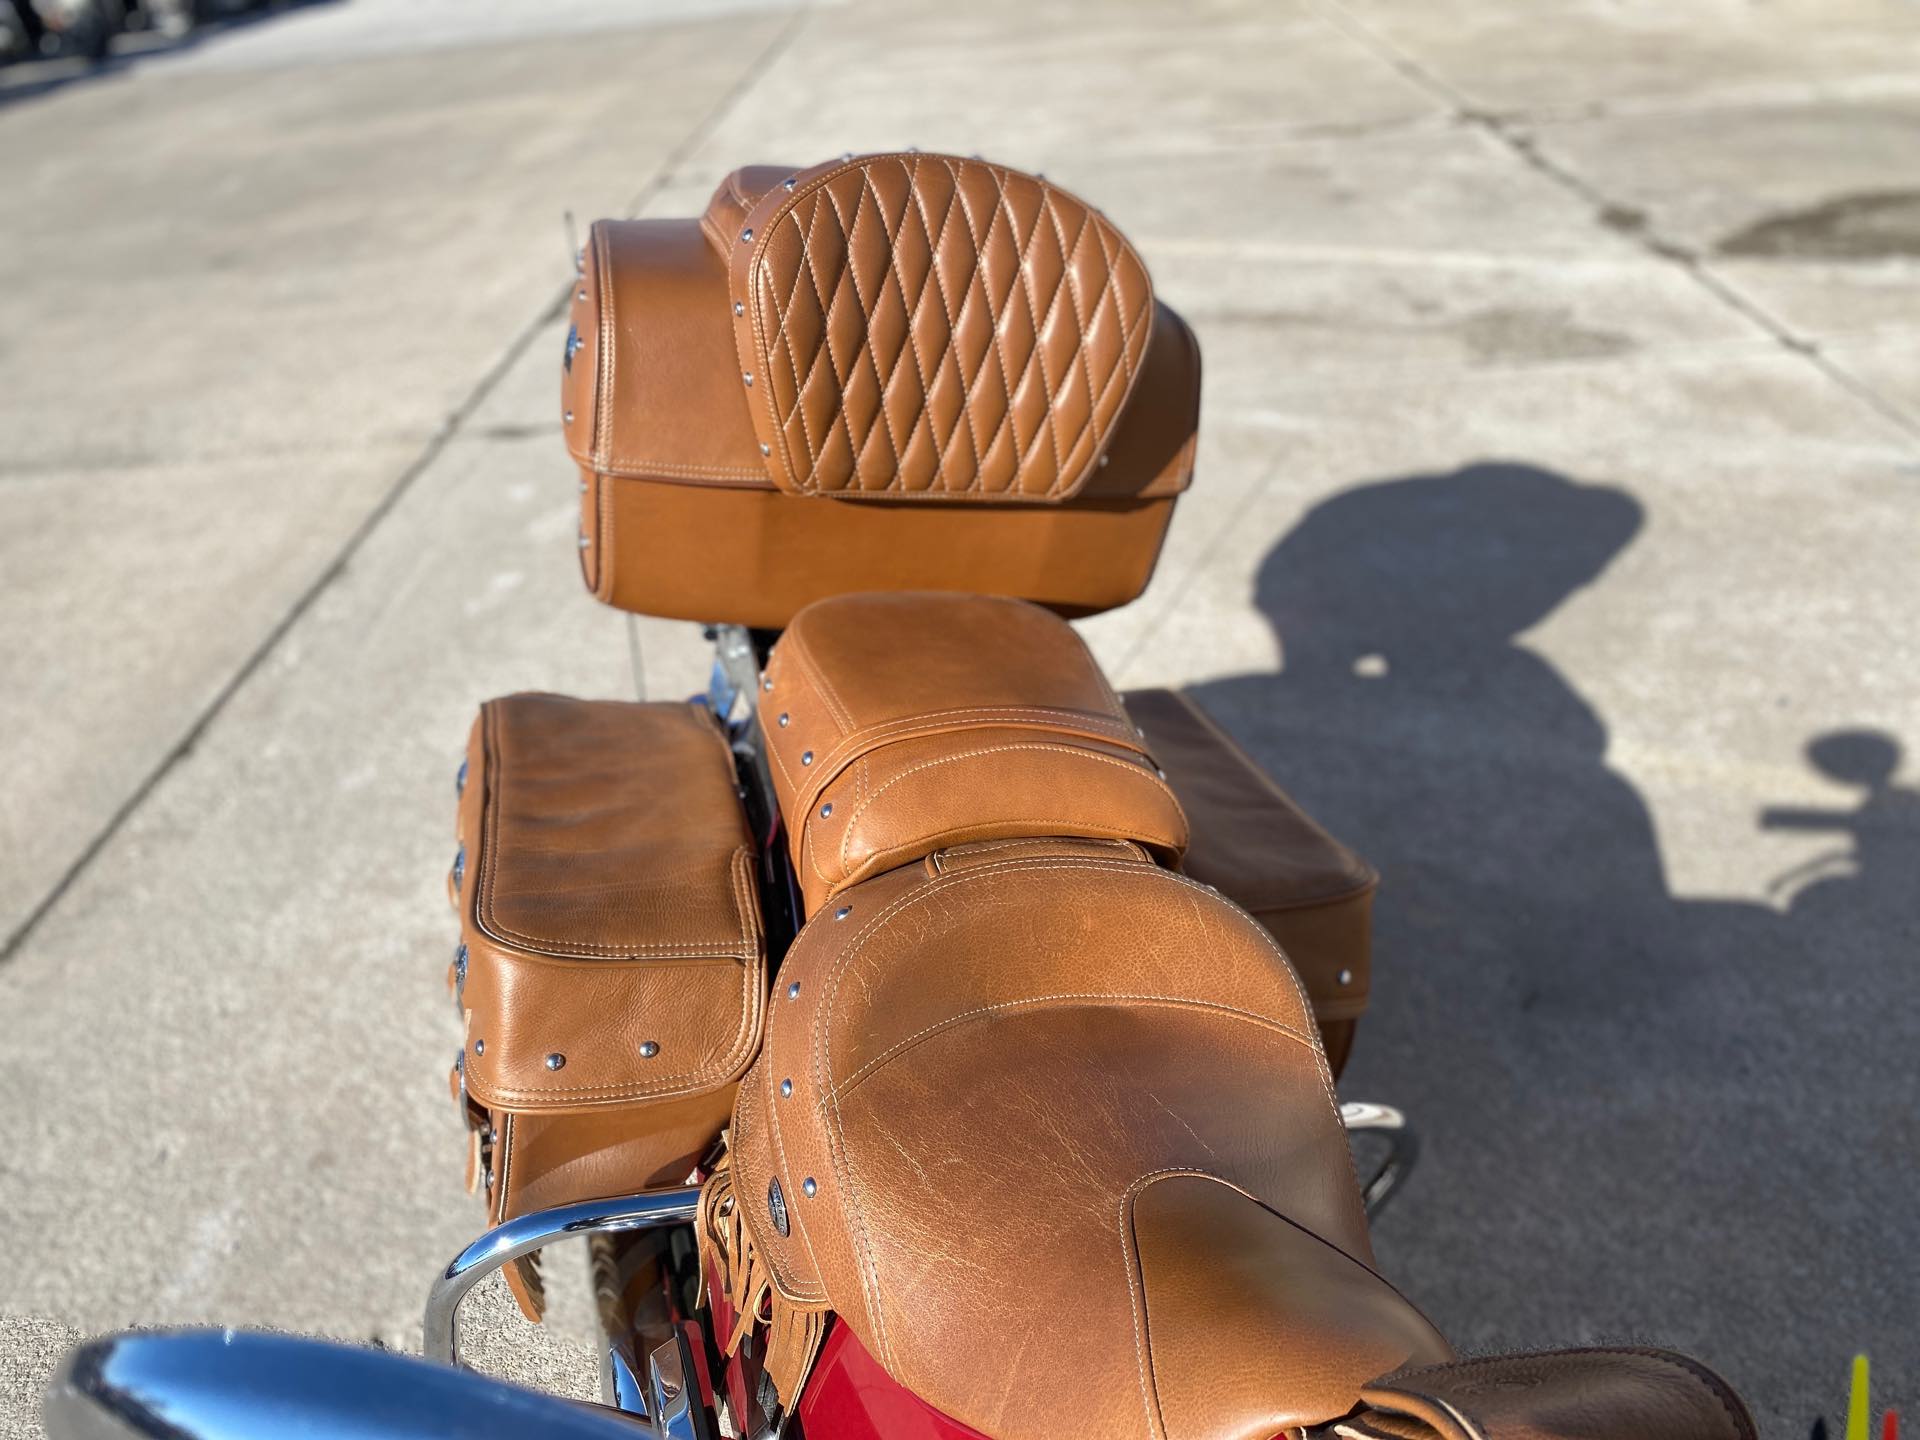 2015 Indian Chieftain Base at Head Indian Motorcycle